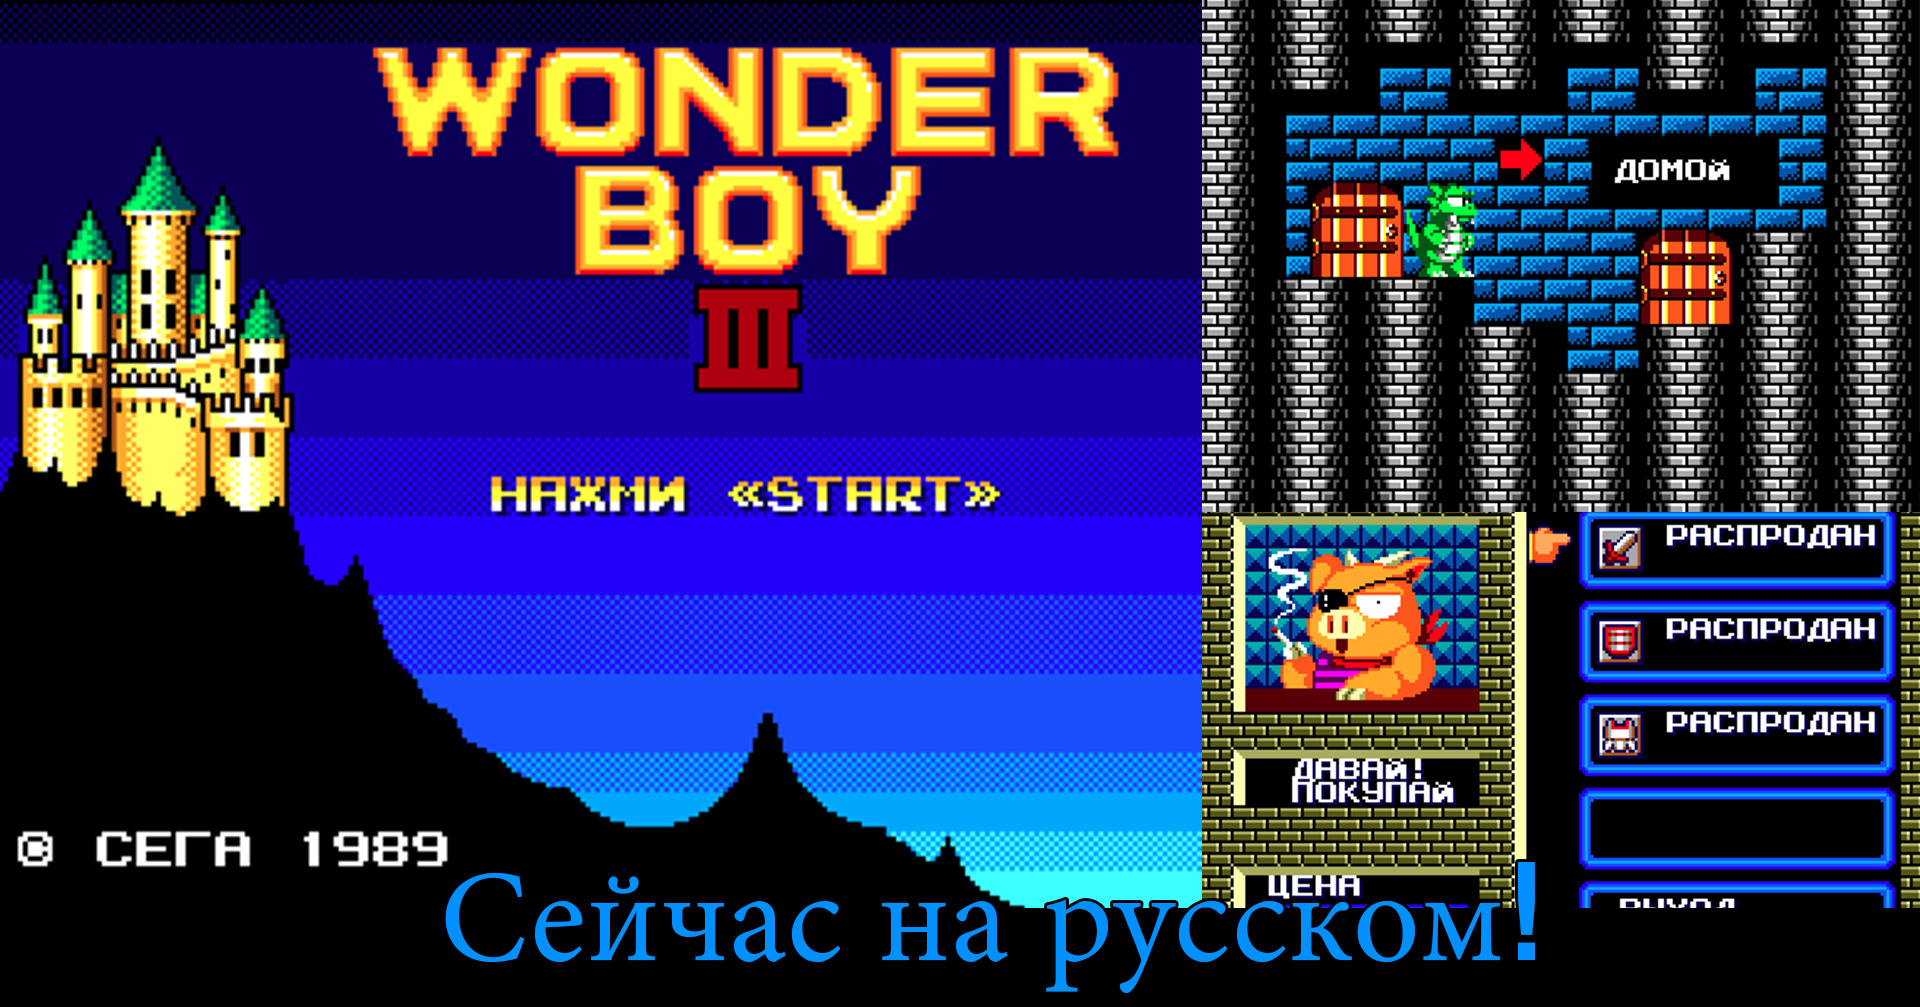 Wonder Boy III: The Dragon's Trap translated to Russian by fans